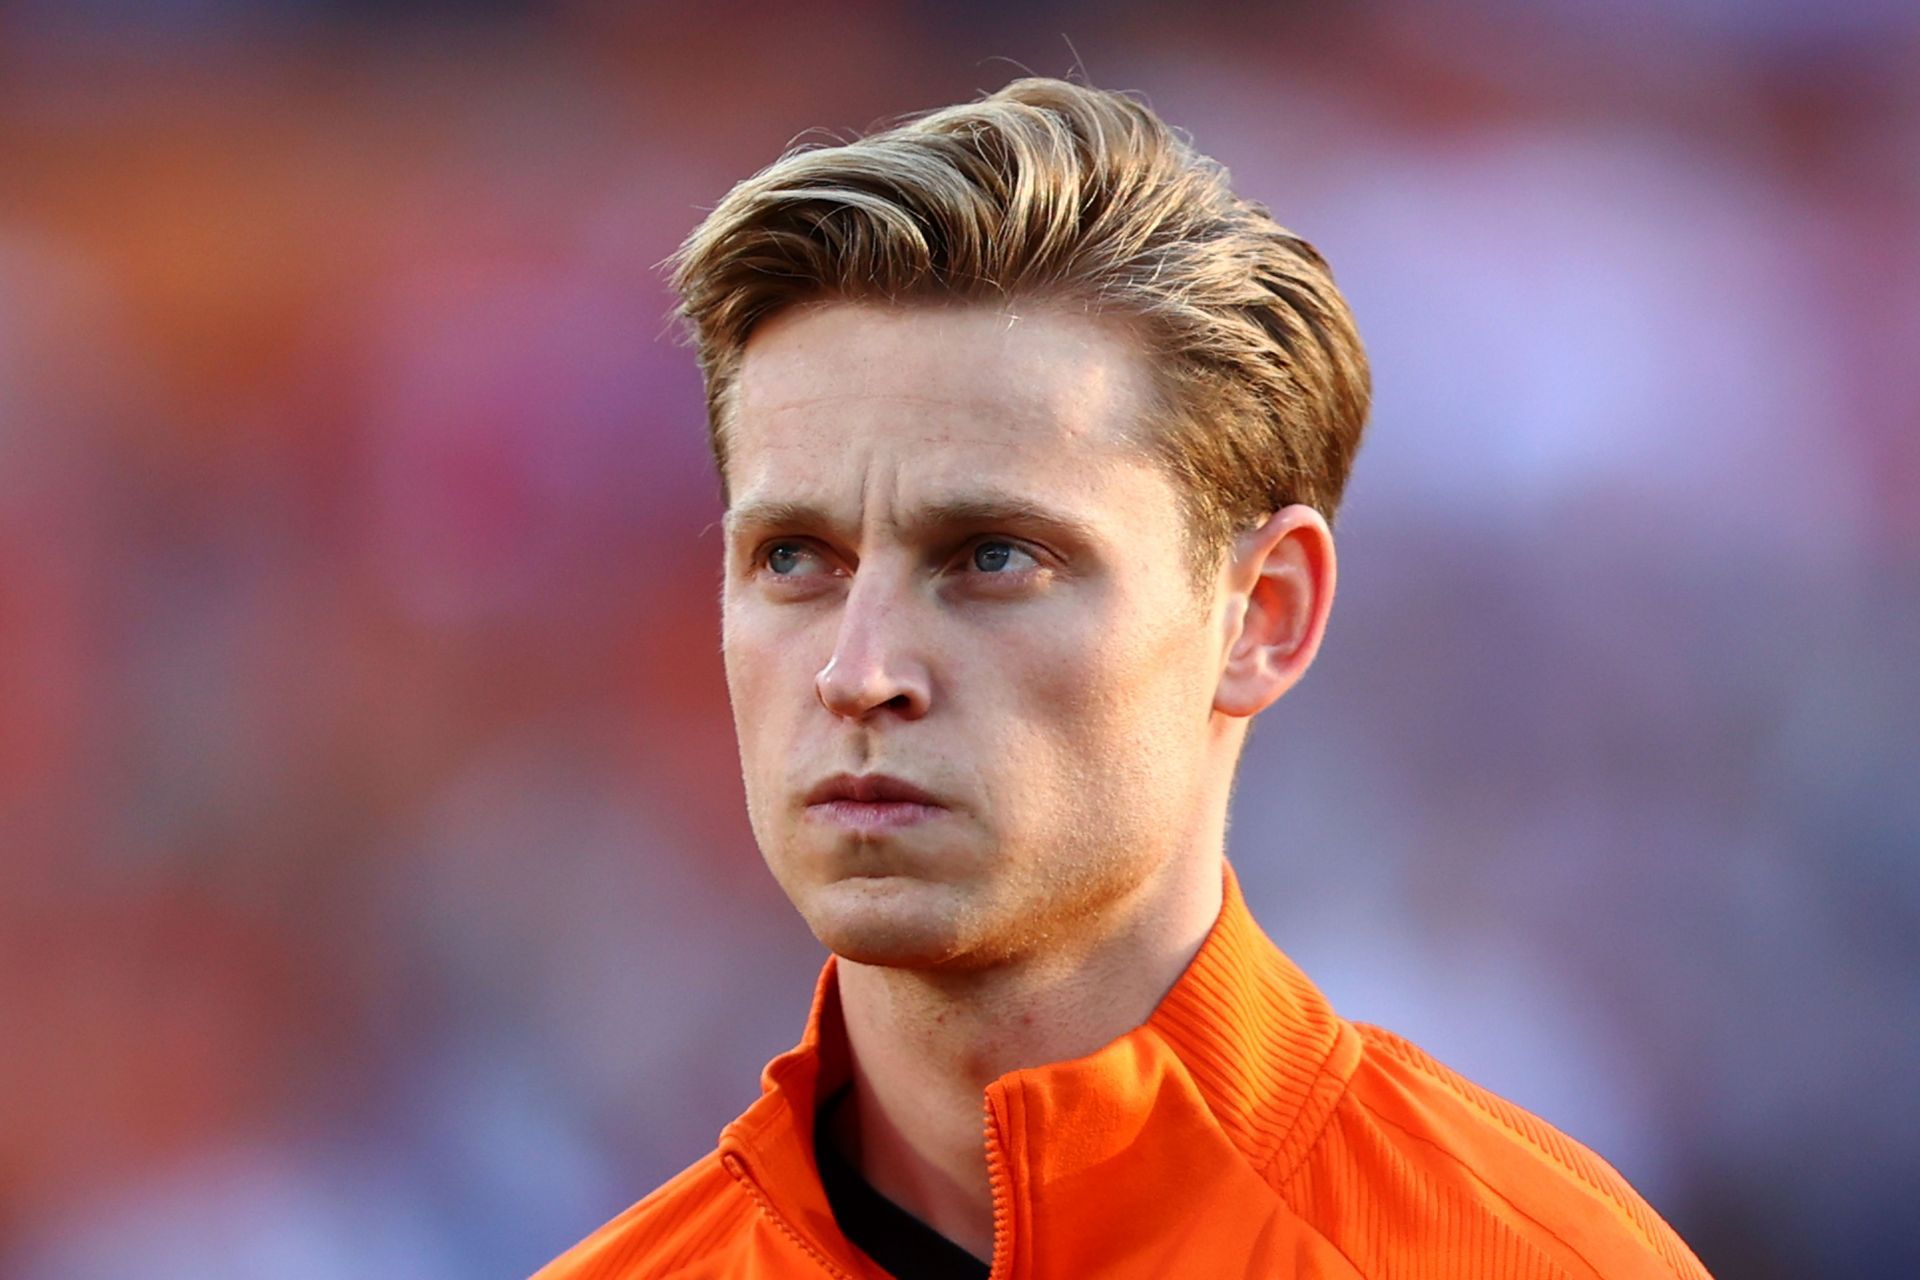 Frenkie de Jong is likely to leave Barcelona this summer.